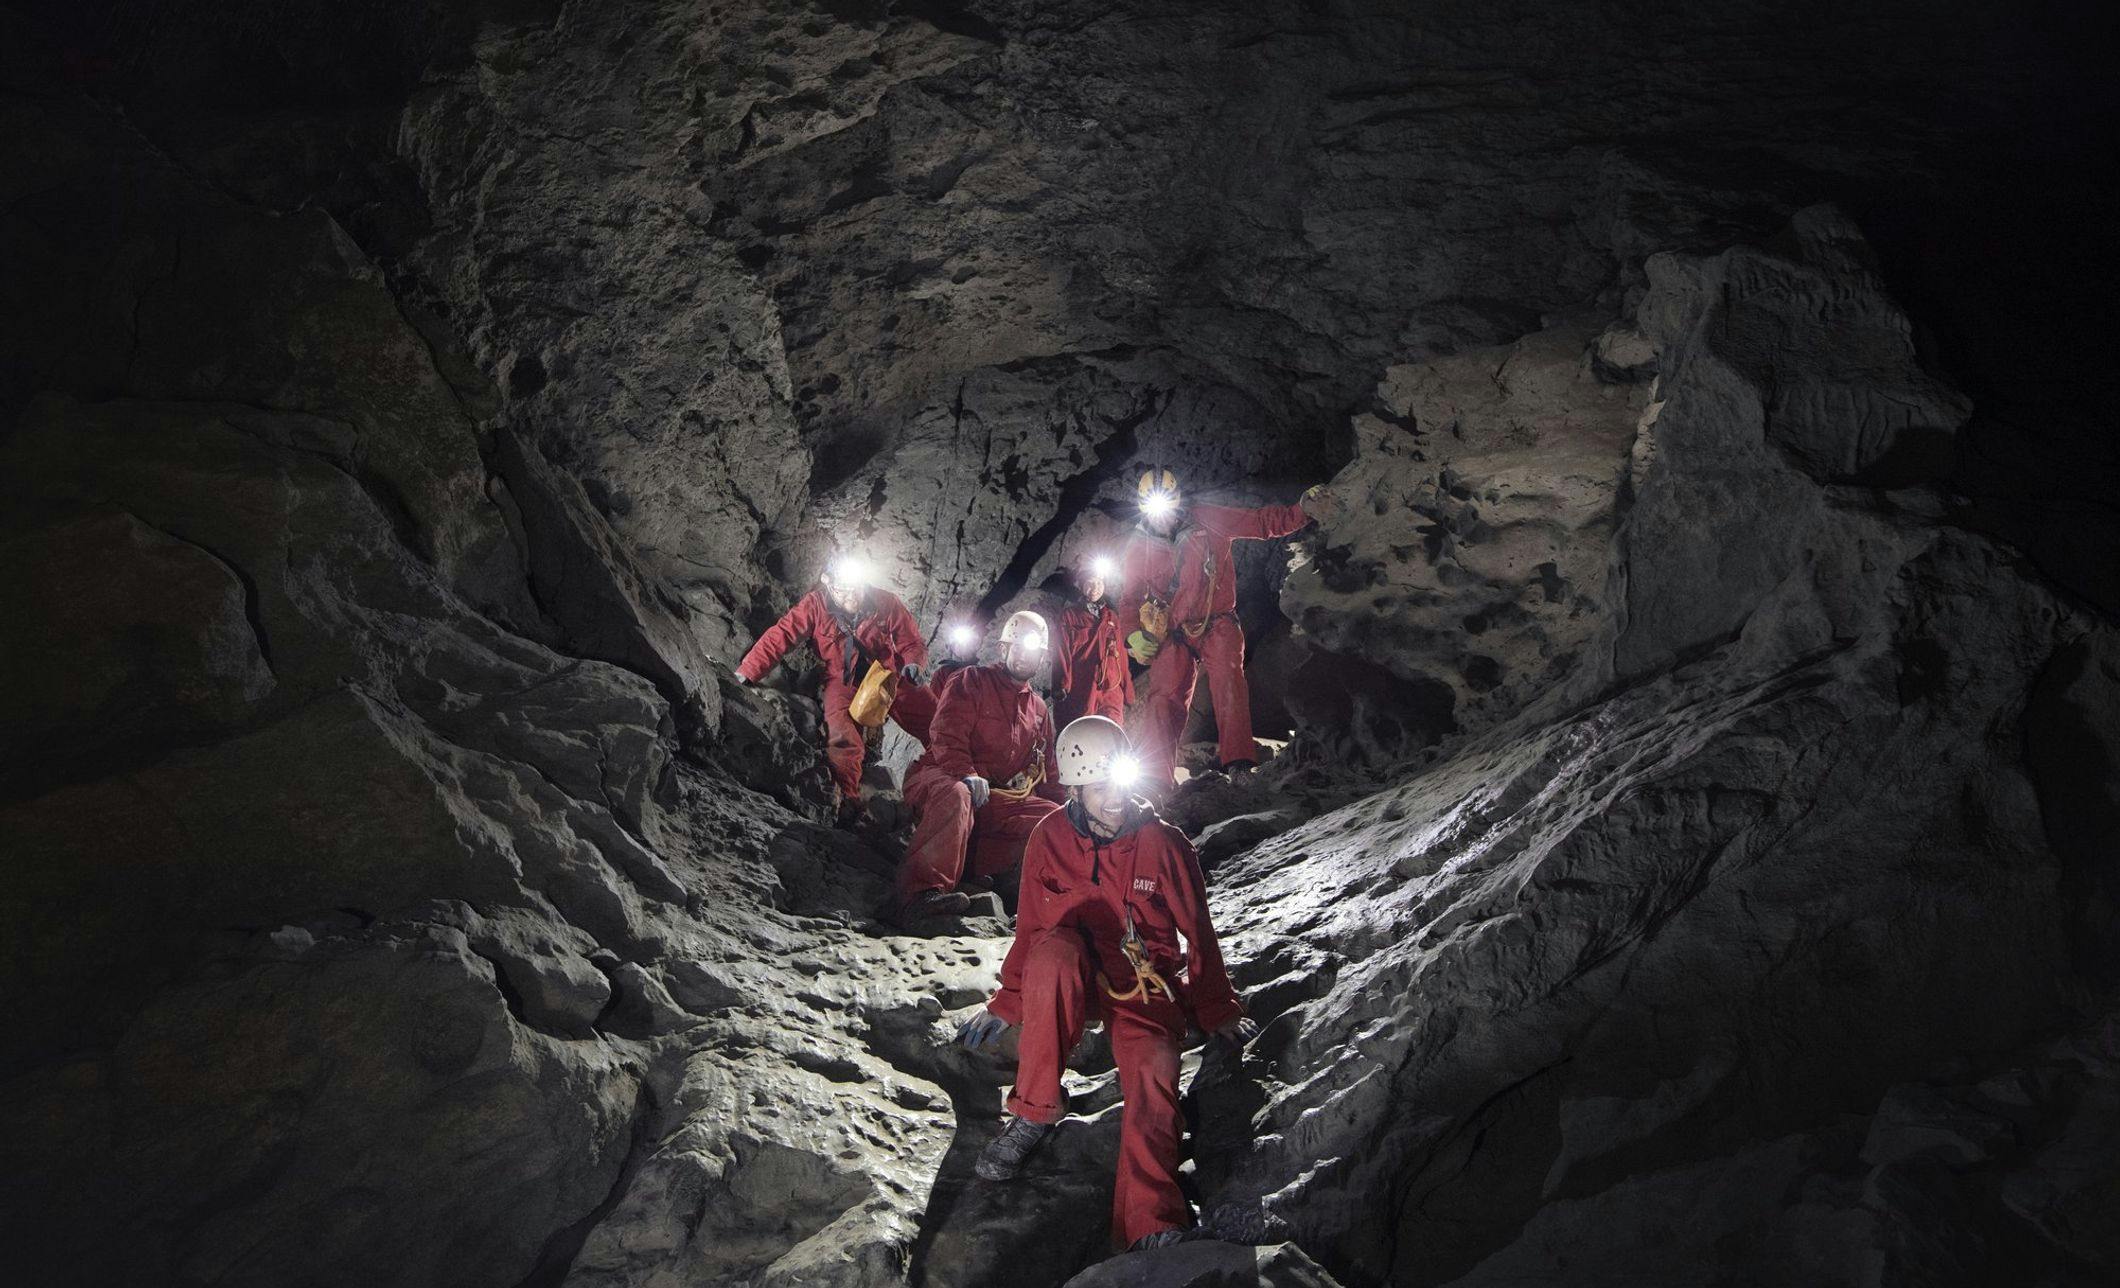 A group traveling through an underground cave wearing helmets and headlamps